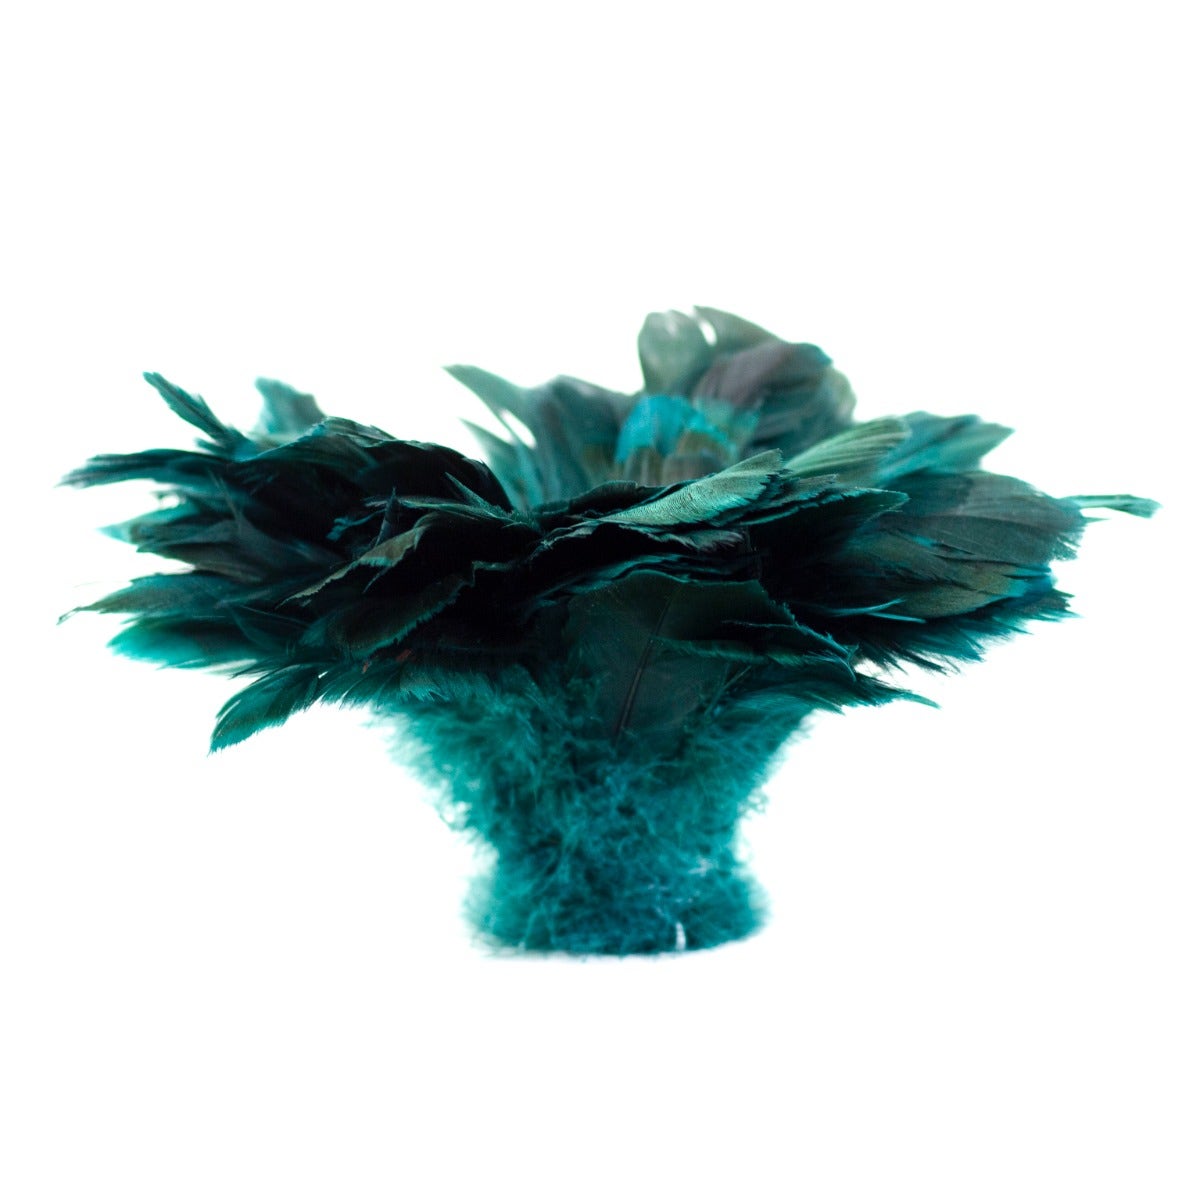 Goose Nagorie Dyed Feathers -Teal